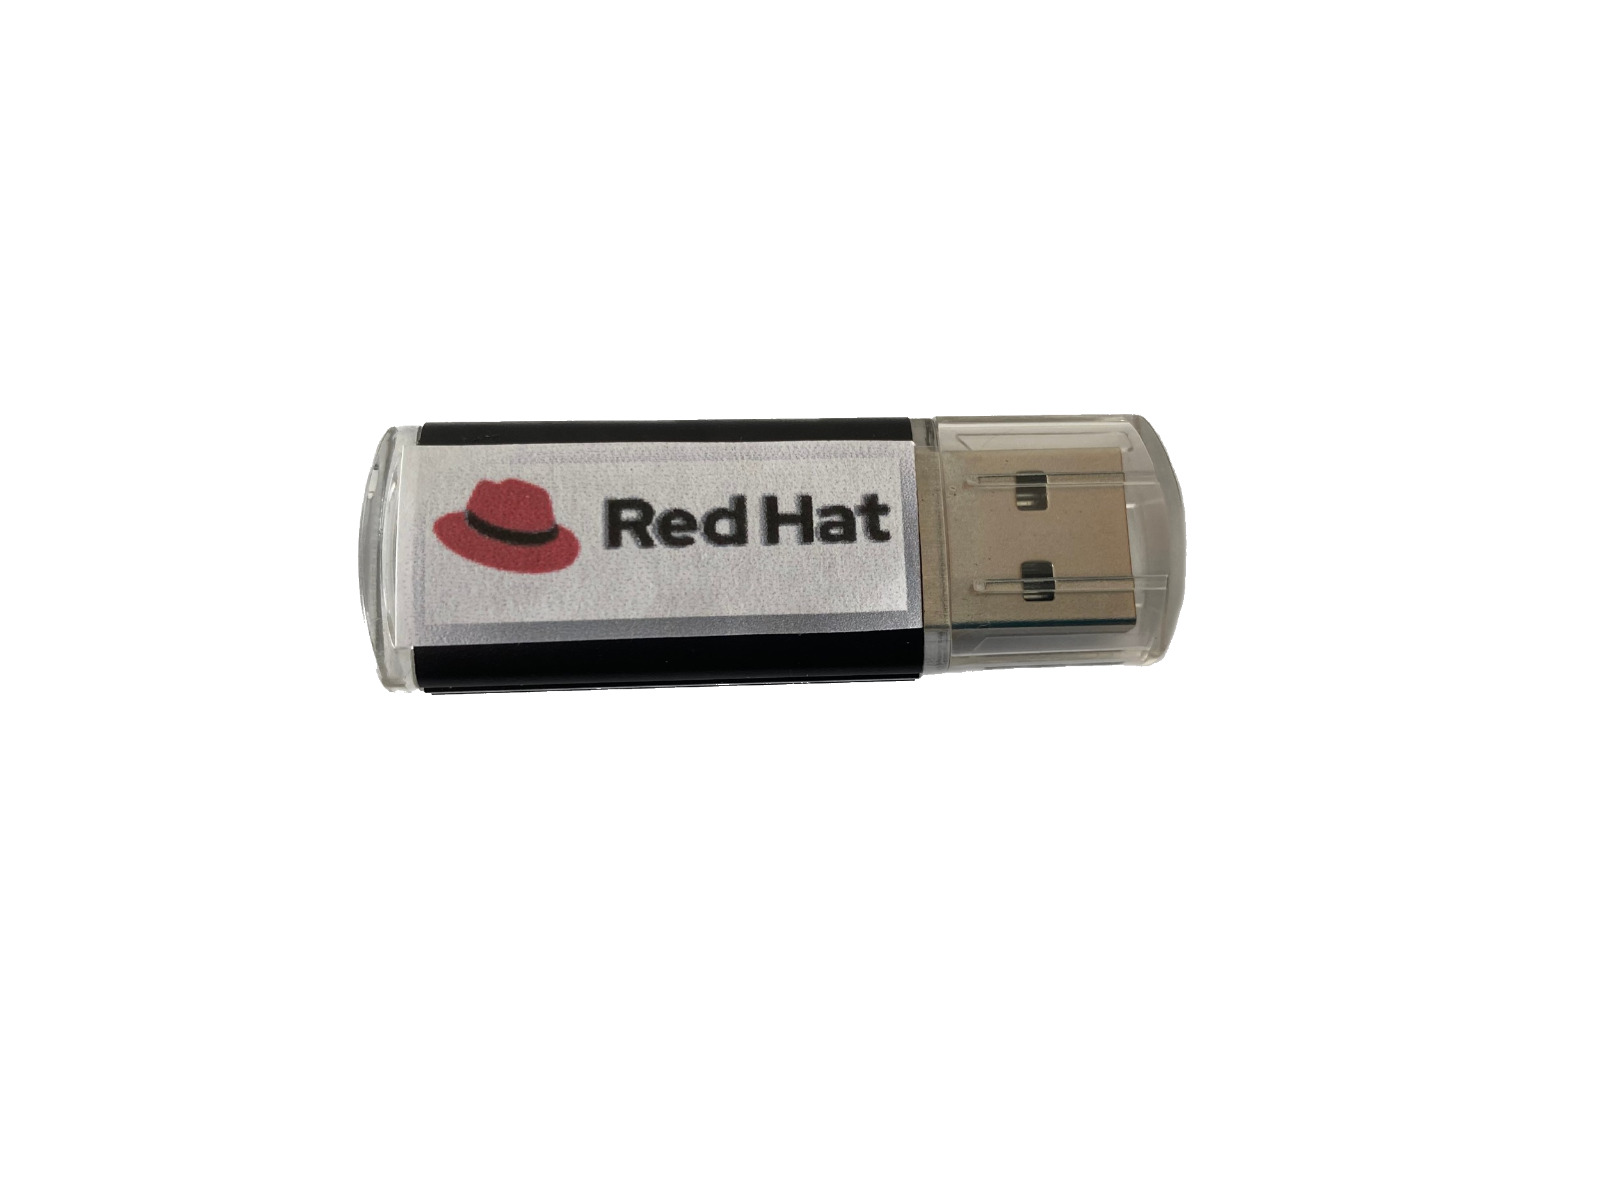 Linux Red Hat  8.3-x86_64-dvd 16GBB  USB Bootable  